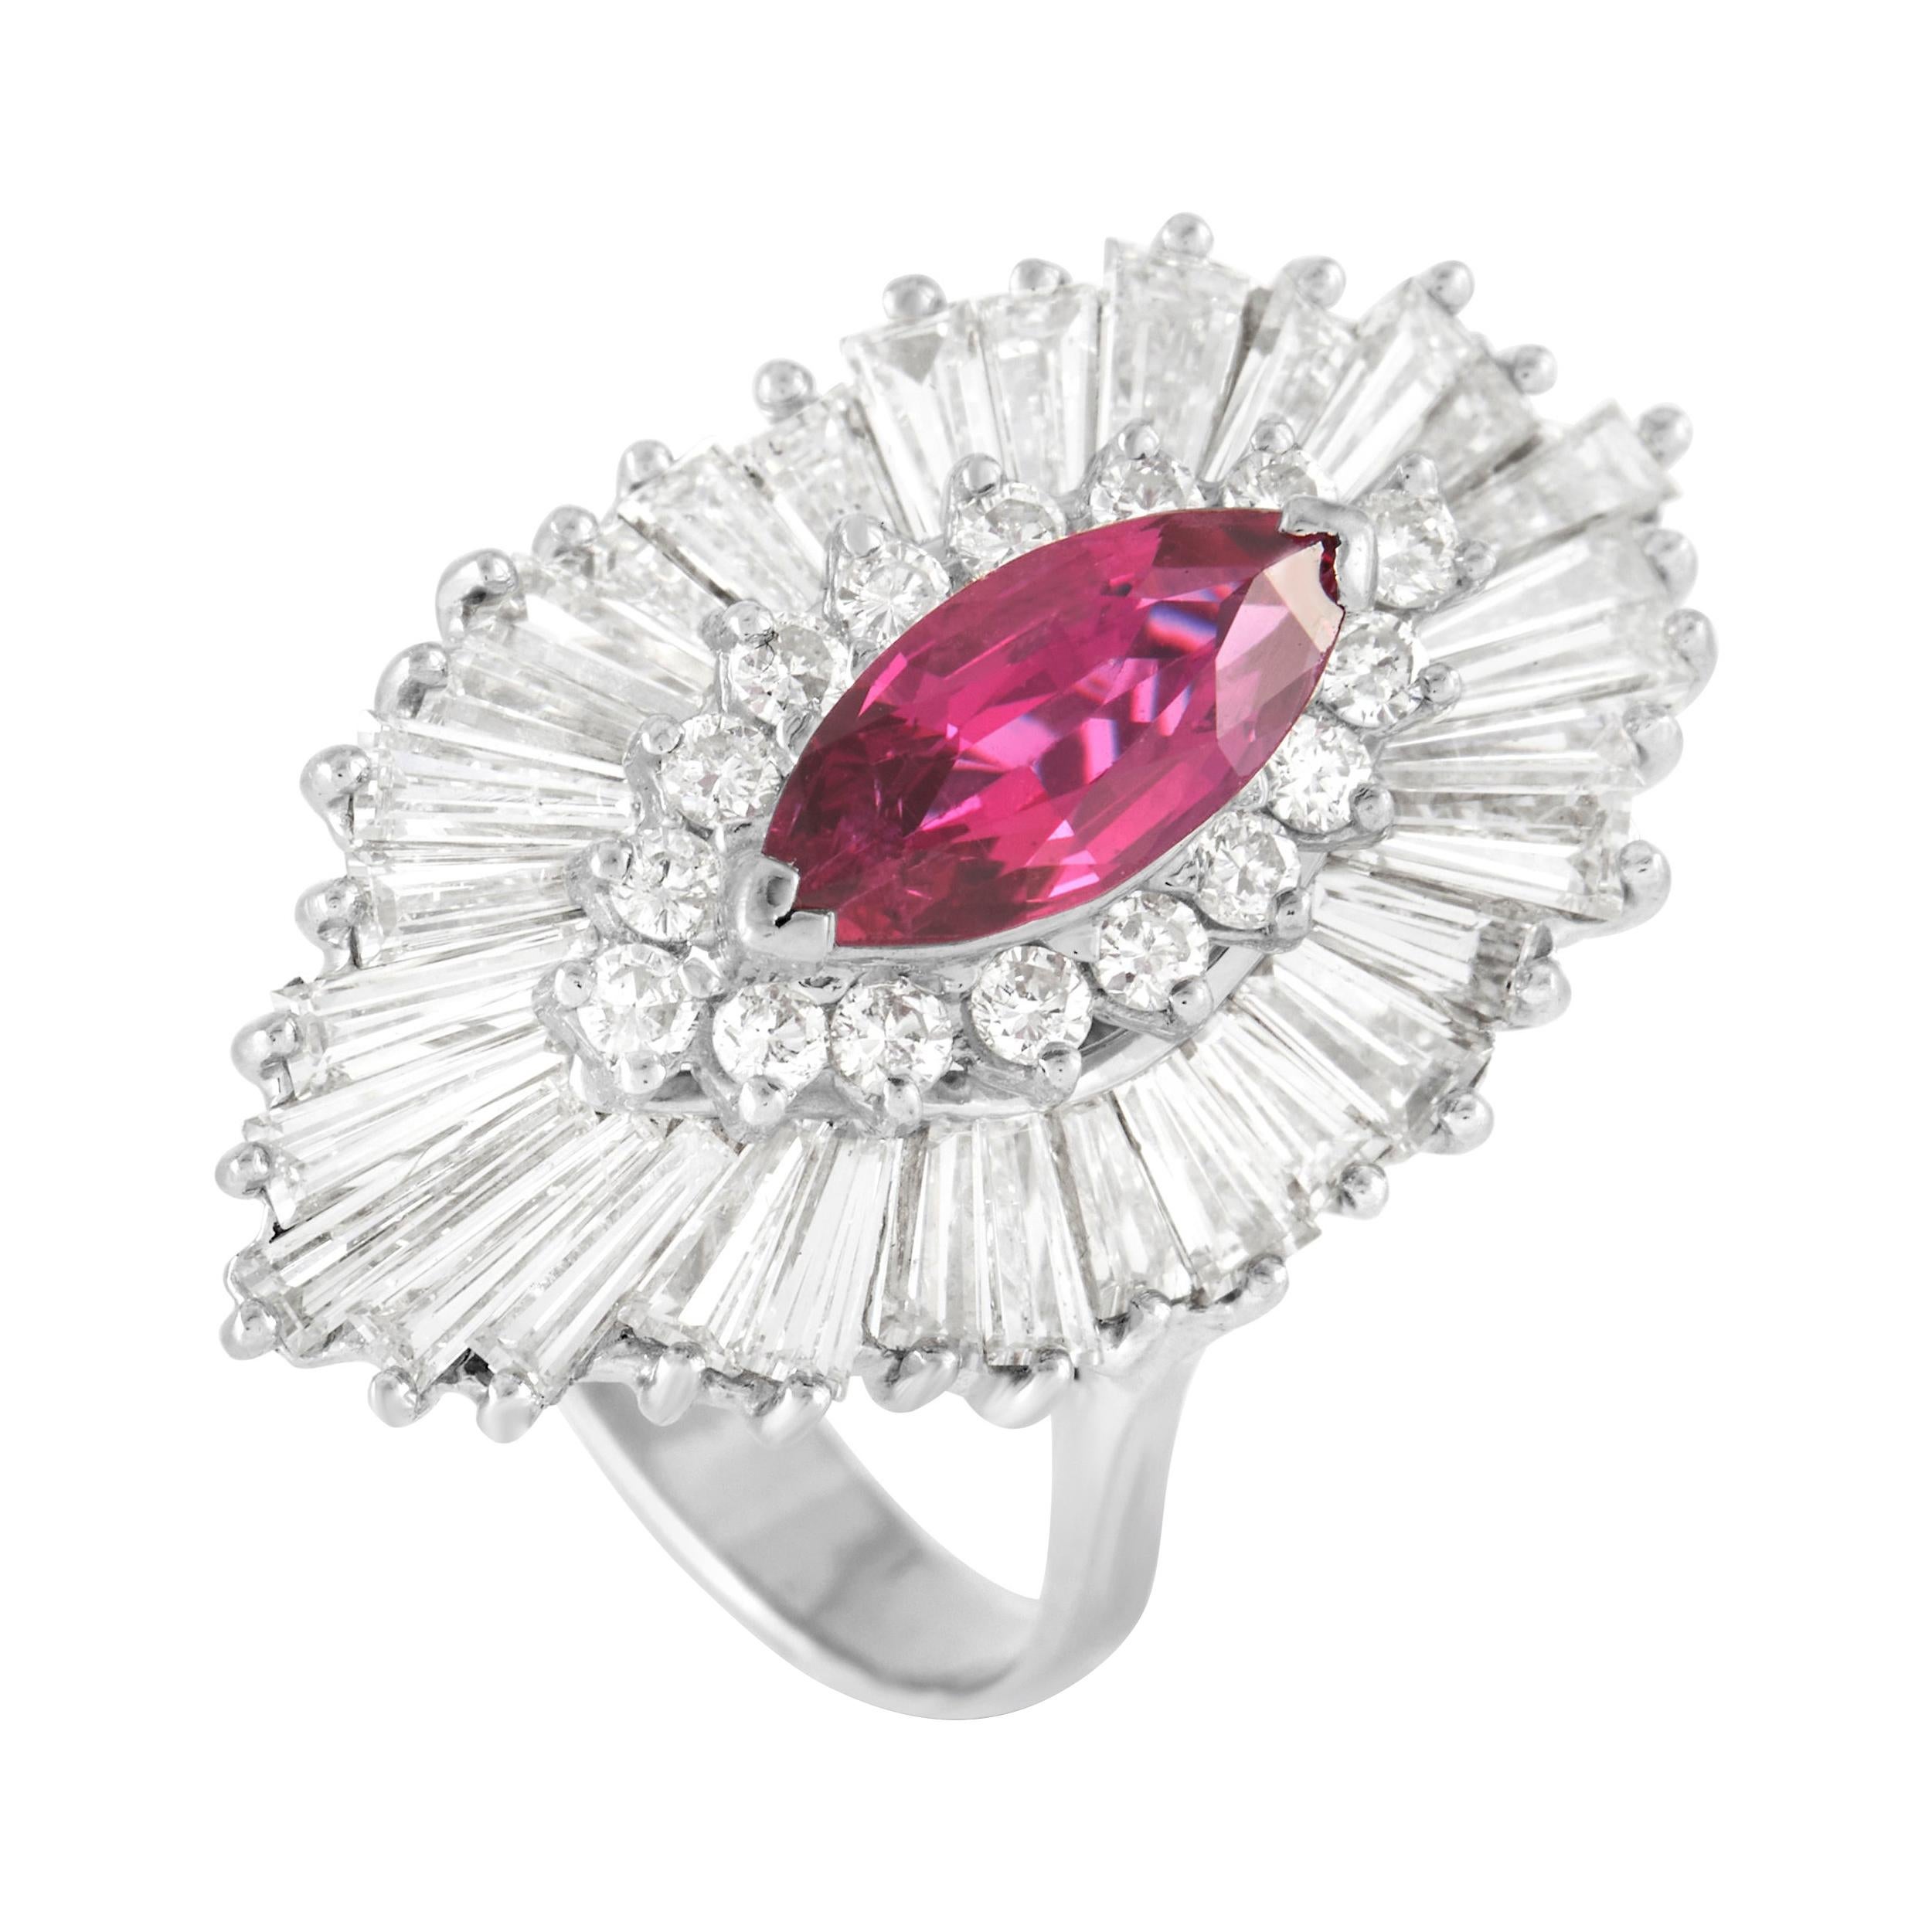 LB Exclusive 18K White Gold 5.50 Ct Diamond and Ruby Ring